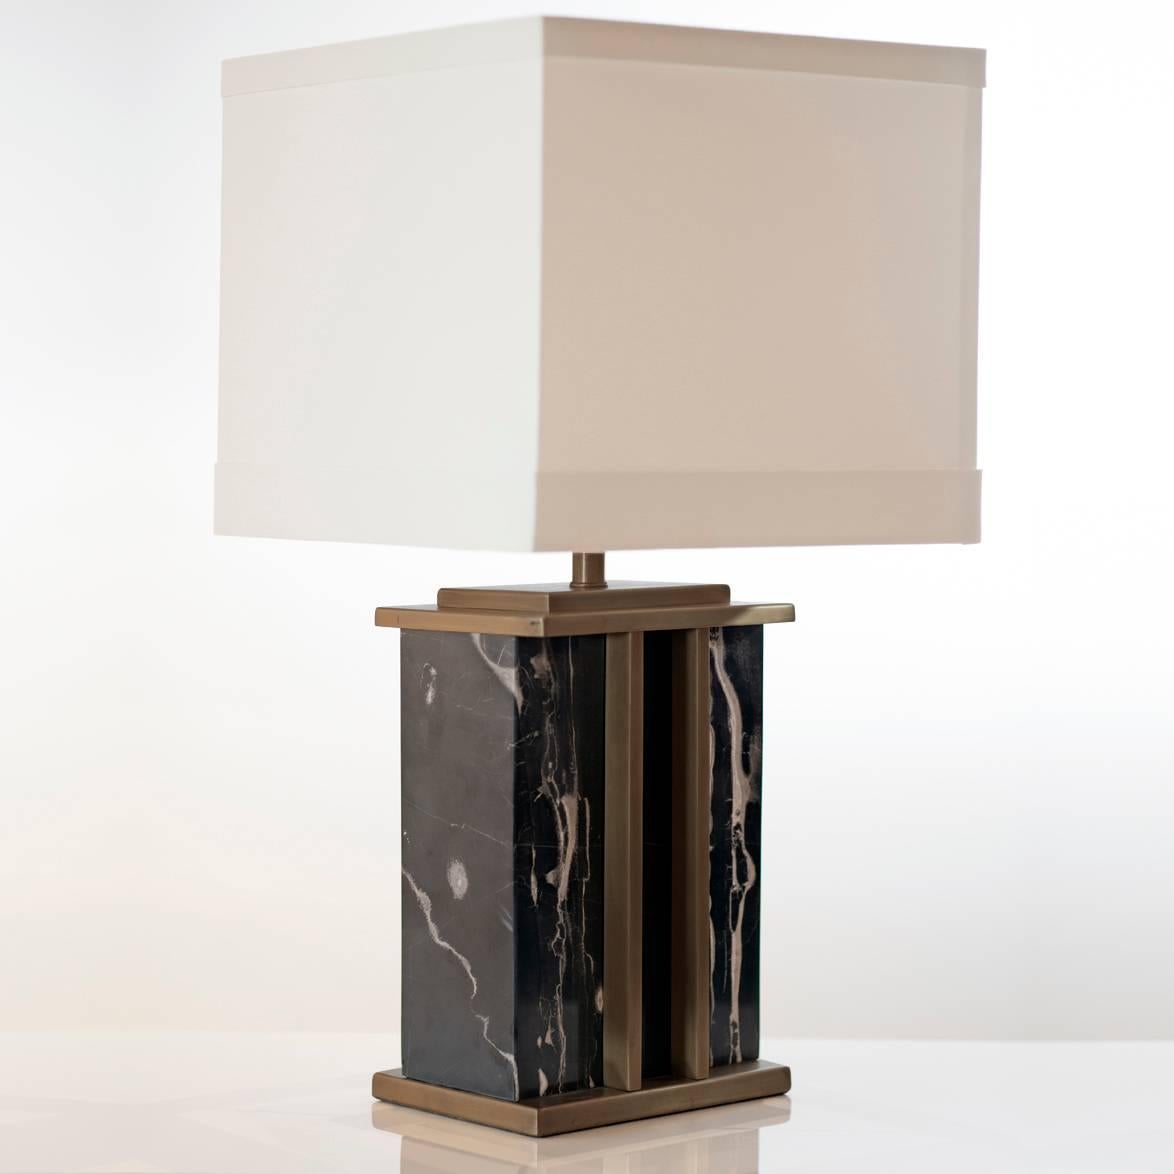 Elegant brass and marble decorative table lamp. The structure of the lamp is made from a black marble with grey veins, the lamp is then finished with brass plinths and brass detailing running vertically down the body of the lamp. This robust lamp